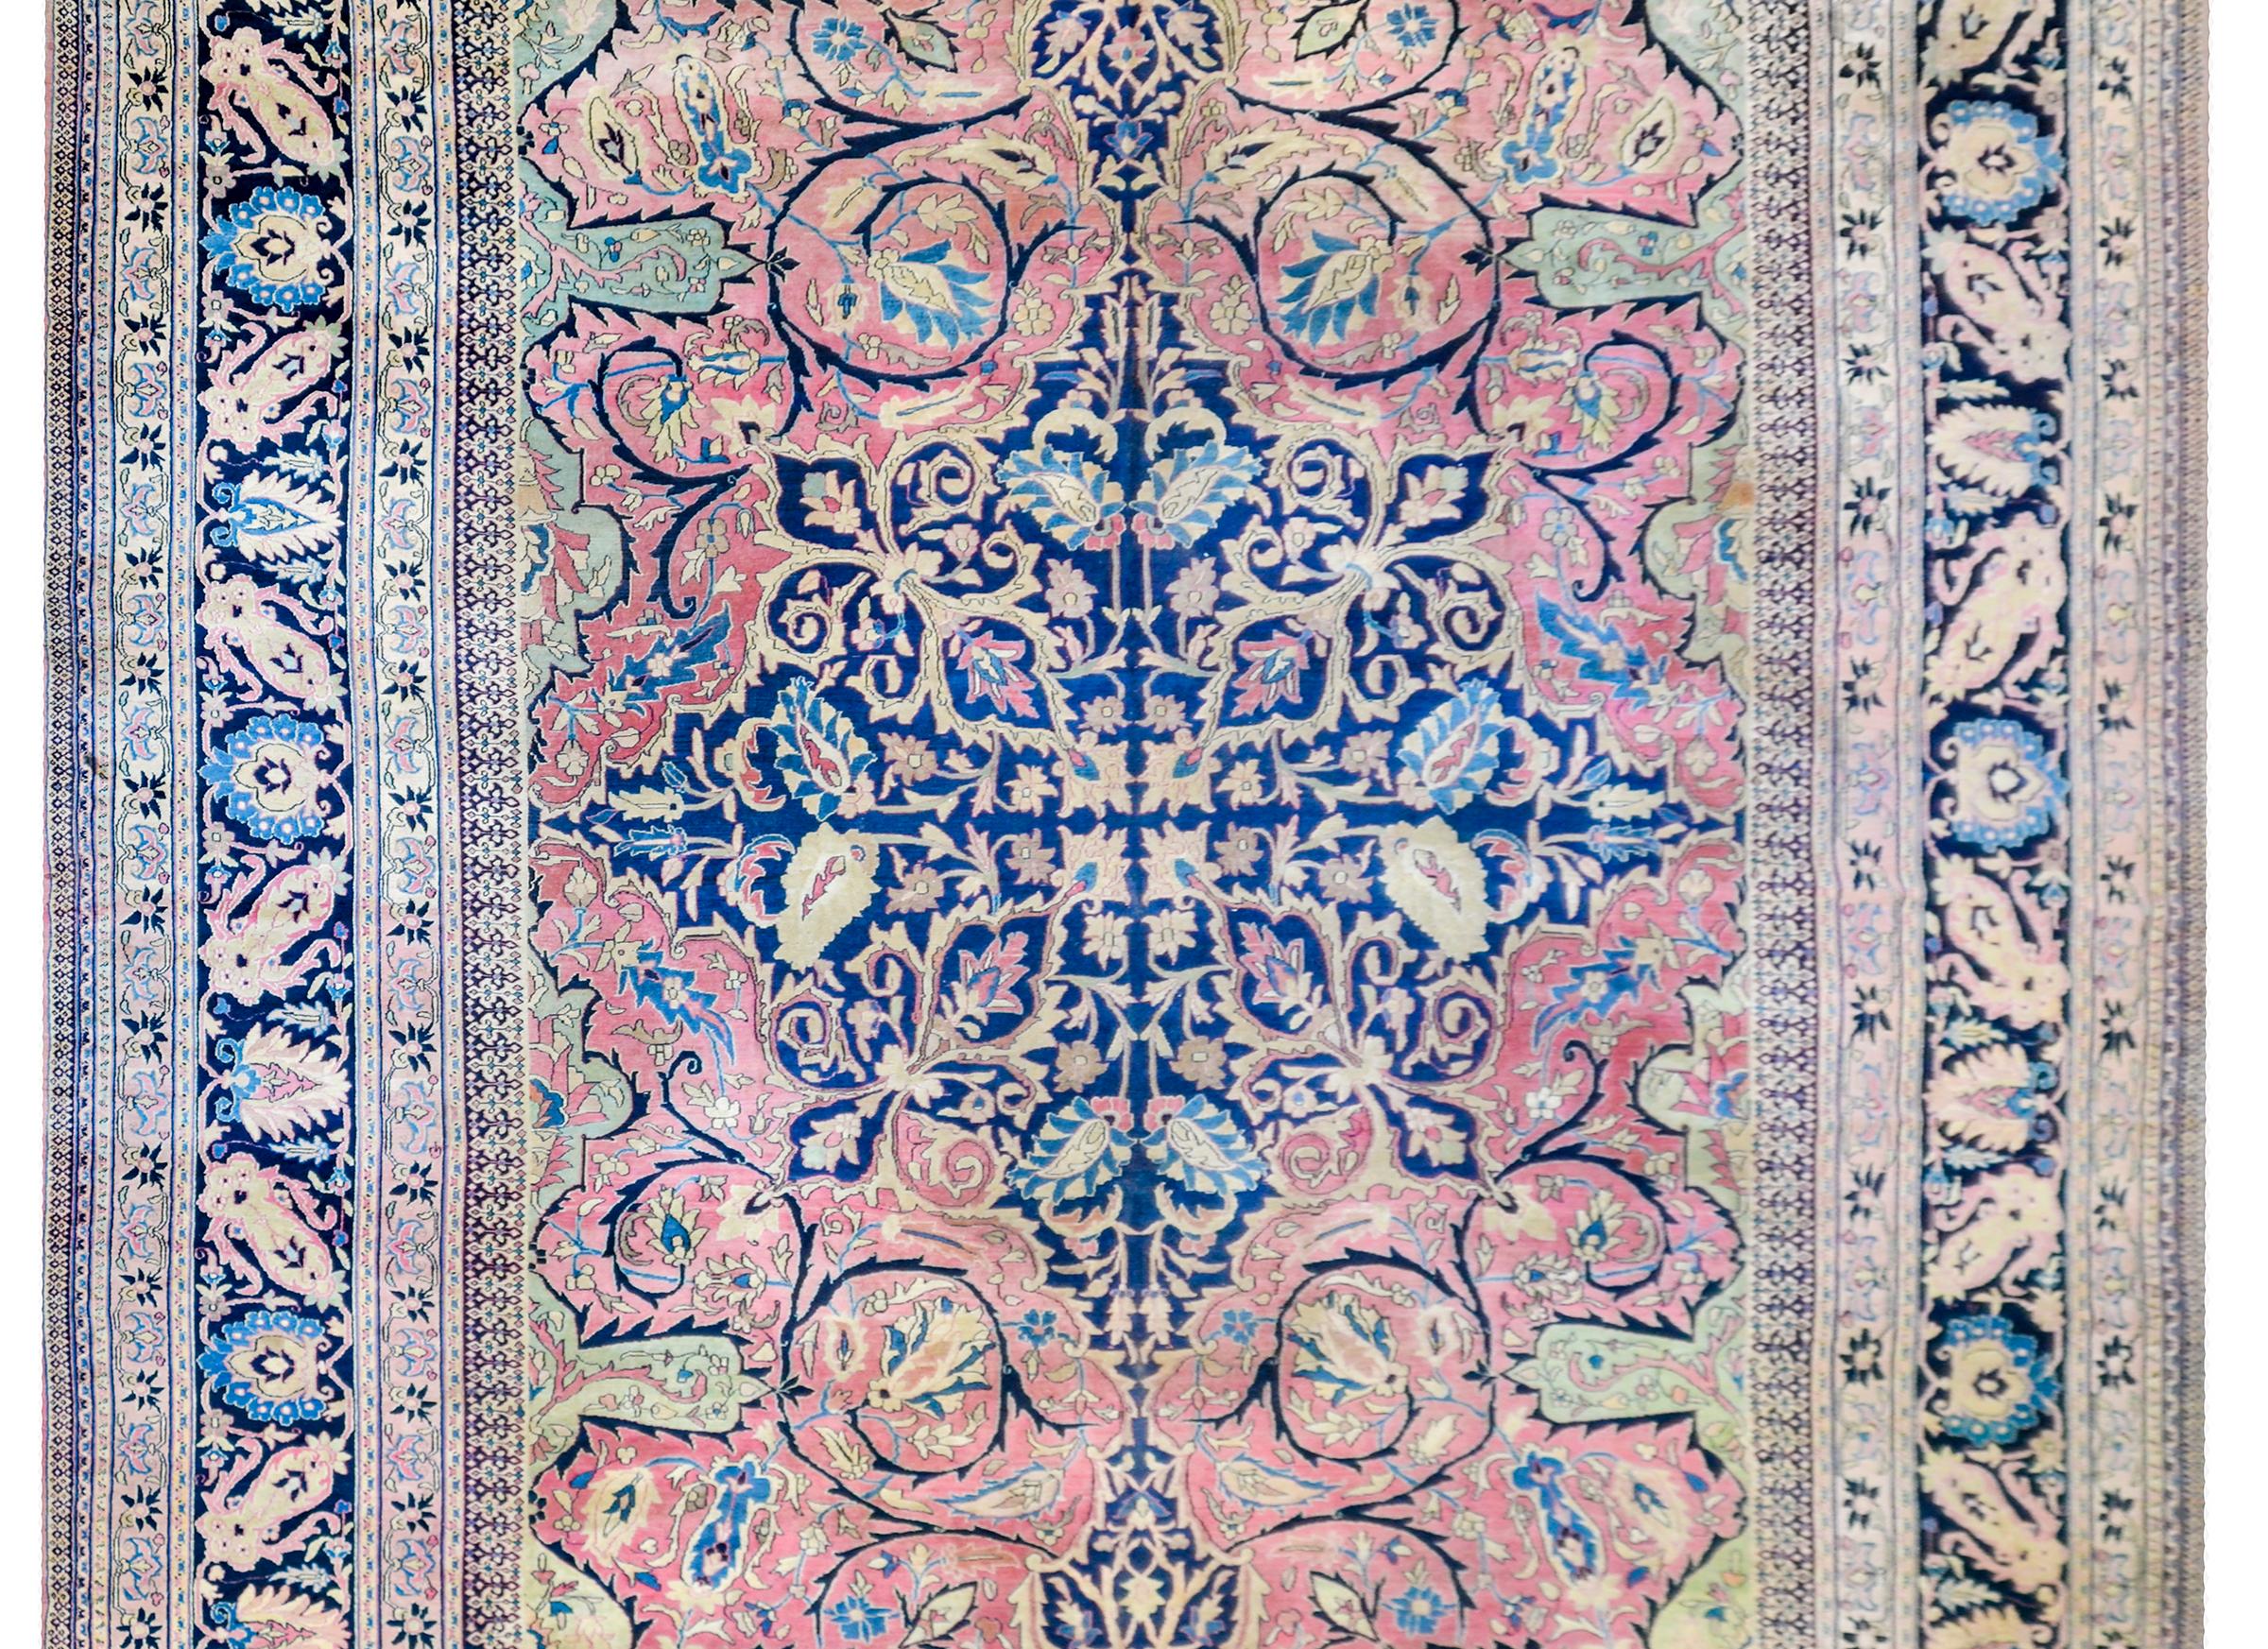 An unbelievable late 19th century Persian Khorasan Dorokhst rug with a four part mirrored pattern containing a central diamond medallion with a floral and leaf motif, on a pale cranberry background with a similar motif. The border is complex with a